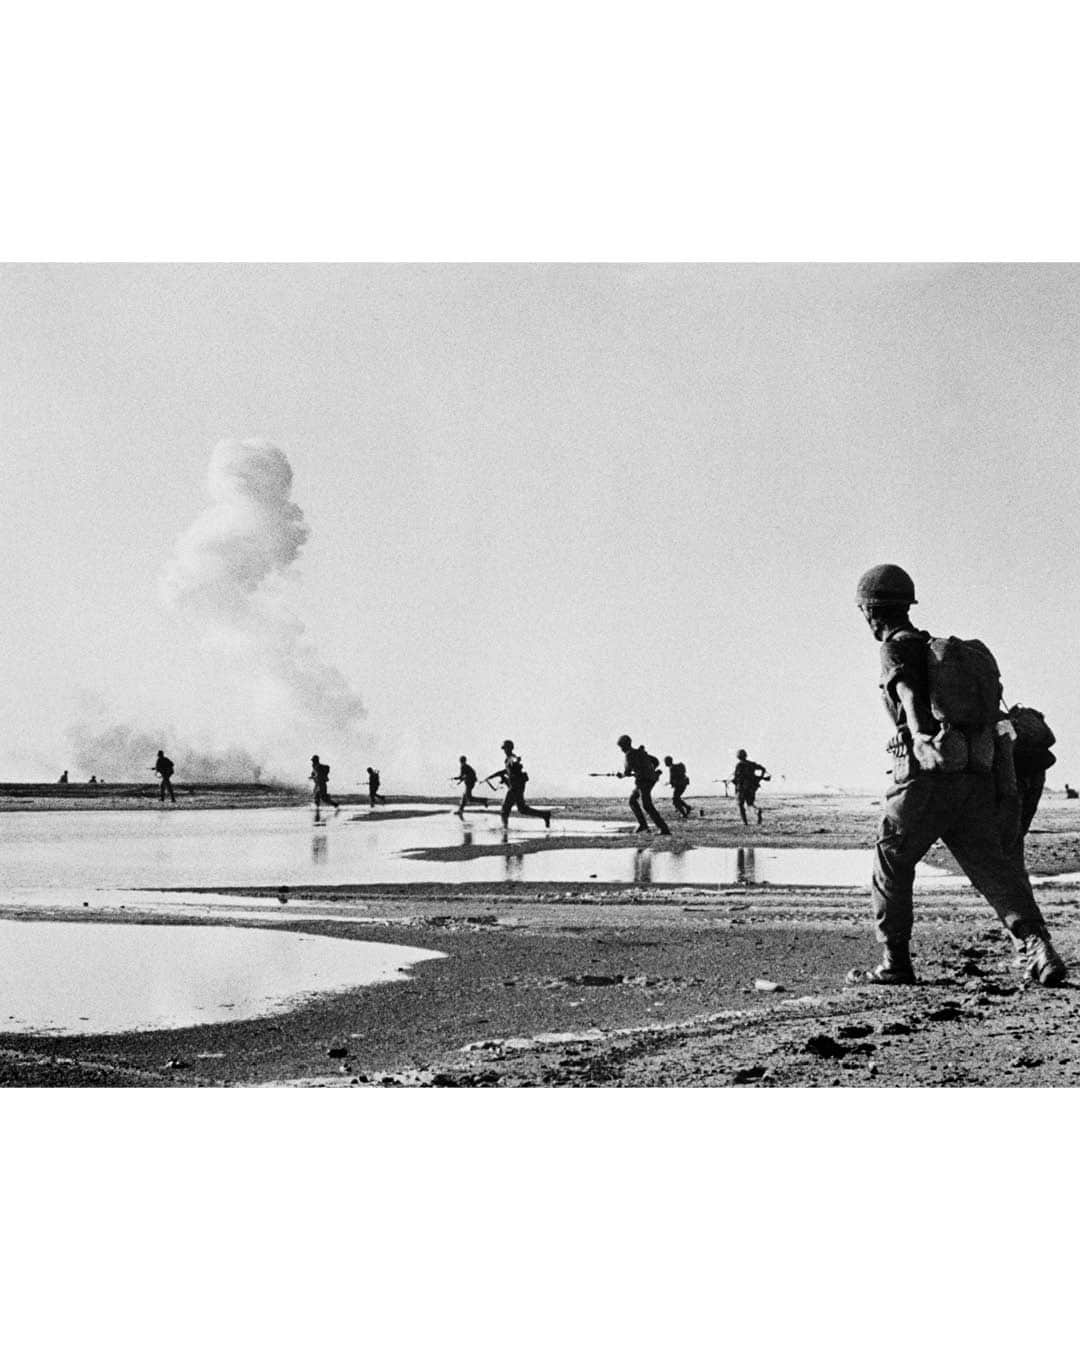 Magnum Photosさんのインスタグラム写真 - (Magnum PhotosInstagram)「Hamas launched a large-scale attack against Israel from the Gaza Strip on Saturday, October 7, a day after the 50th anniversary of the start of the Yom Kippur War, also known as the 1973 Arab-Israeli War.⁠ ⁠ On October 6, 1973, Egypt and Syria launched a surprise attack on Israeli positions in the Sinai Peninsula and Golan Heights. Magnum photographers @michabaram.archive, @leonardfreed, @abbas.photos and Bruno Barbey closely documented the ensuing 19-day armed conflict between Israel and a coalition of Arab states led by Egypt and Syria.⁠ ⁠ Hamas began this weekend’s attack with a barrage of rockets while militants crossed the border into Israel, killing and taking civilians and soldiers hostage. Israel has since formally declared war, responding with heavy airstrikes and cutting off electricity in Gaza. Both sides have suffered hundreds of casualties.⁠ ⁠ PHOTOS (left to right): ⁠ ⁠ (1) Israel Army in Sinai Desert. Israel. 1973.© @leonardfreed / Magnum Photos⁠ ⁠ (2) Egyptian troops crossing the Suez canal during the war with Israel.  Fardan. Egypt. 1973. © @abbas.photos / Magnum Photos⁠ ⁠ (3) The body of a dead Palestinian from the Saika Corps of the Syrian Army Brigade. Israel/Syria. October 13, 1973. © @abbas.photos / Magnum Photos⁠ ⁠ (4) Israeli forces advancing with rocket fire toward the Suez Canal. 1973. © @michabaram.archive / Magnum Photos⁠ ⁠ (5) 34 Israeli soldiers taken prisoner by Syrians are carried away on trucks. Their hands are bound and they are blindfolded to be presented to the international press. October 15, 1973. © Bruno Barbey / Magnum Photos⁠ ⁠ (6) Israeli units making their way to Damascus (Syria) stop with their tanks and guns for traditional prayers. October 16, 1973. © @leonardfreed / Magnum Photos⁠ ⁠ (7) Israeli forces on their way to the "Budapest" stronghold, a code name for the northernmost stronghold on the Bar Lev line. North Sinai. October 1973. © @michabaram.archive / Magnum Photos⁠ ⁠ (8) Israeli Defense Minister Moshe Dayan. Israel/Syria. October 11, 1973. © @abbas.photos / Magnum Photos⁠ ⁠ (9) Silhouettes of Israeli soldiers during fighting in the desert. Sinai October 1973. © @michabaram.archive / Magnum Photos」10月9日 21時00分 - magnumphotos